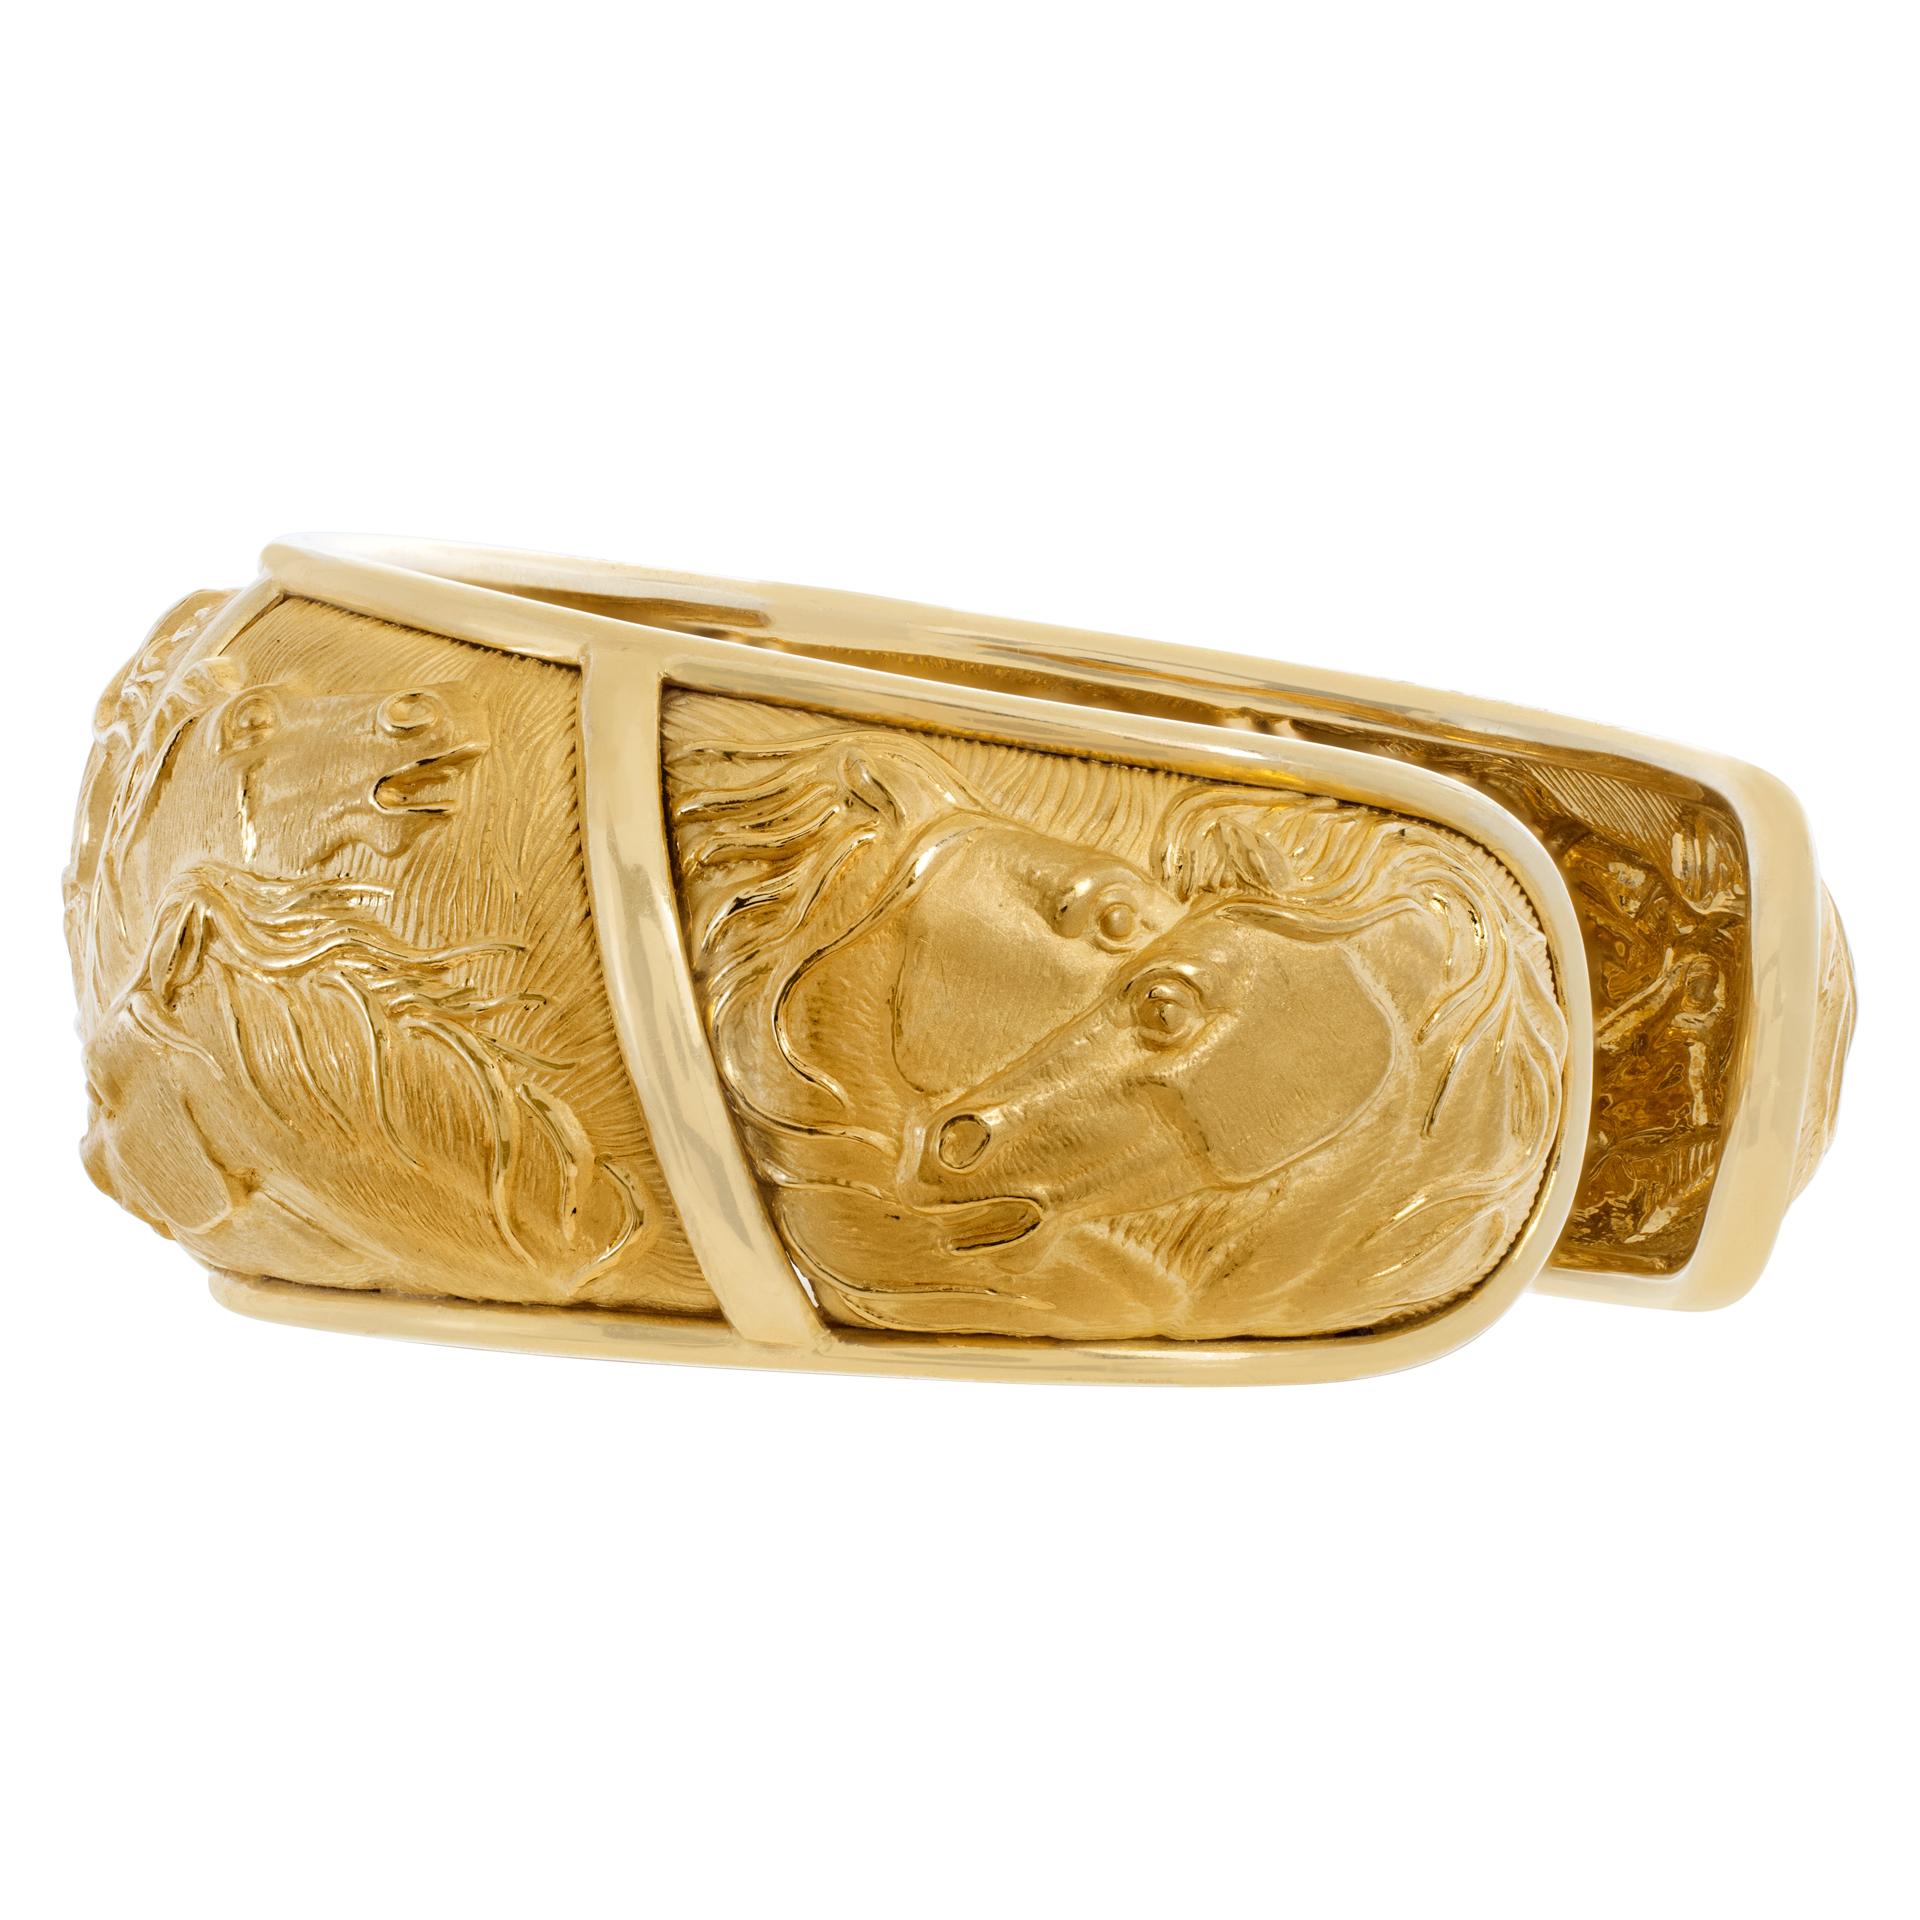 Carrera y Carrera Mosaico collection 18 Karat yellow gold cuff bangle In Excellent Condition For Sale In Surfside, FL